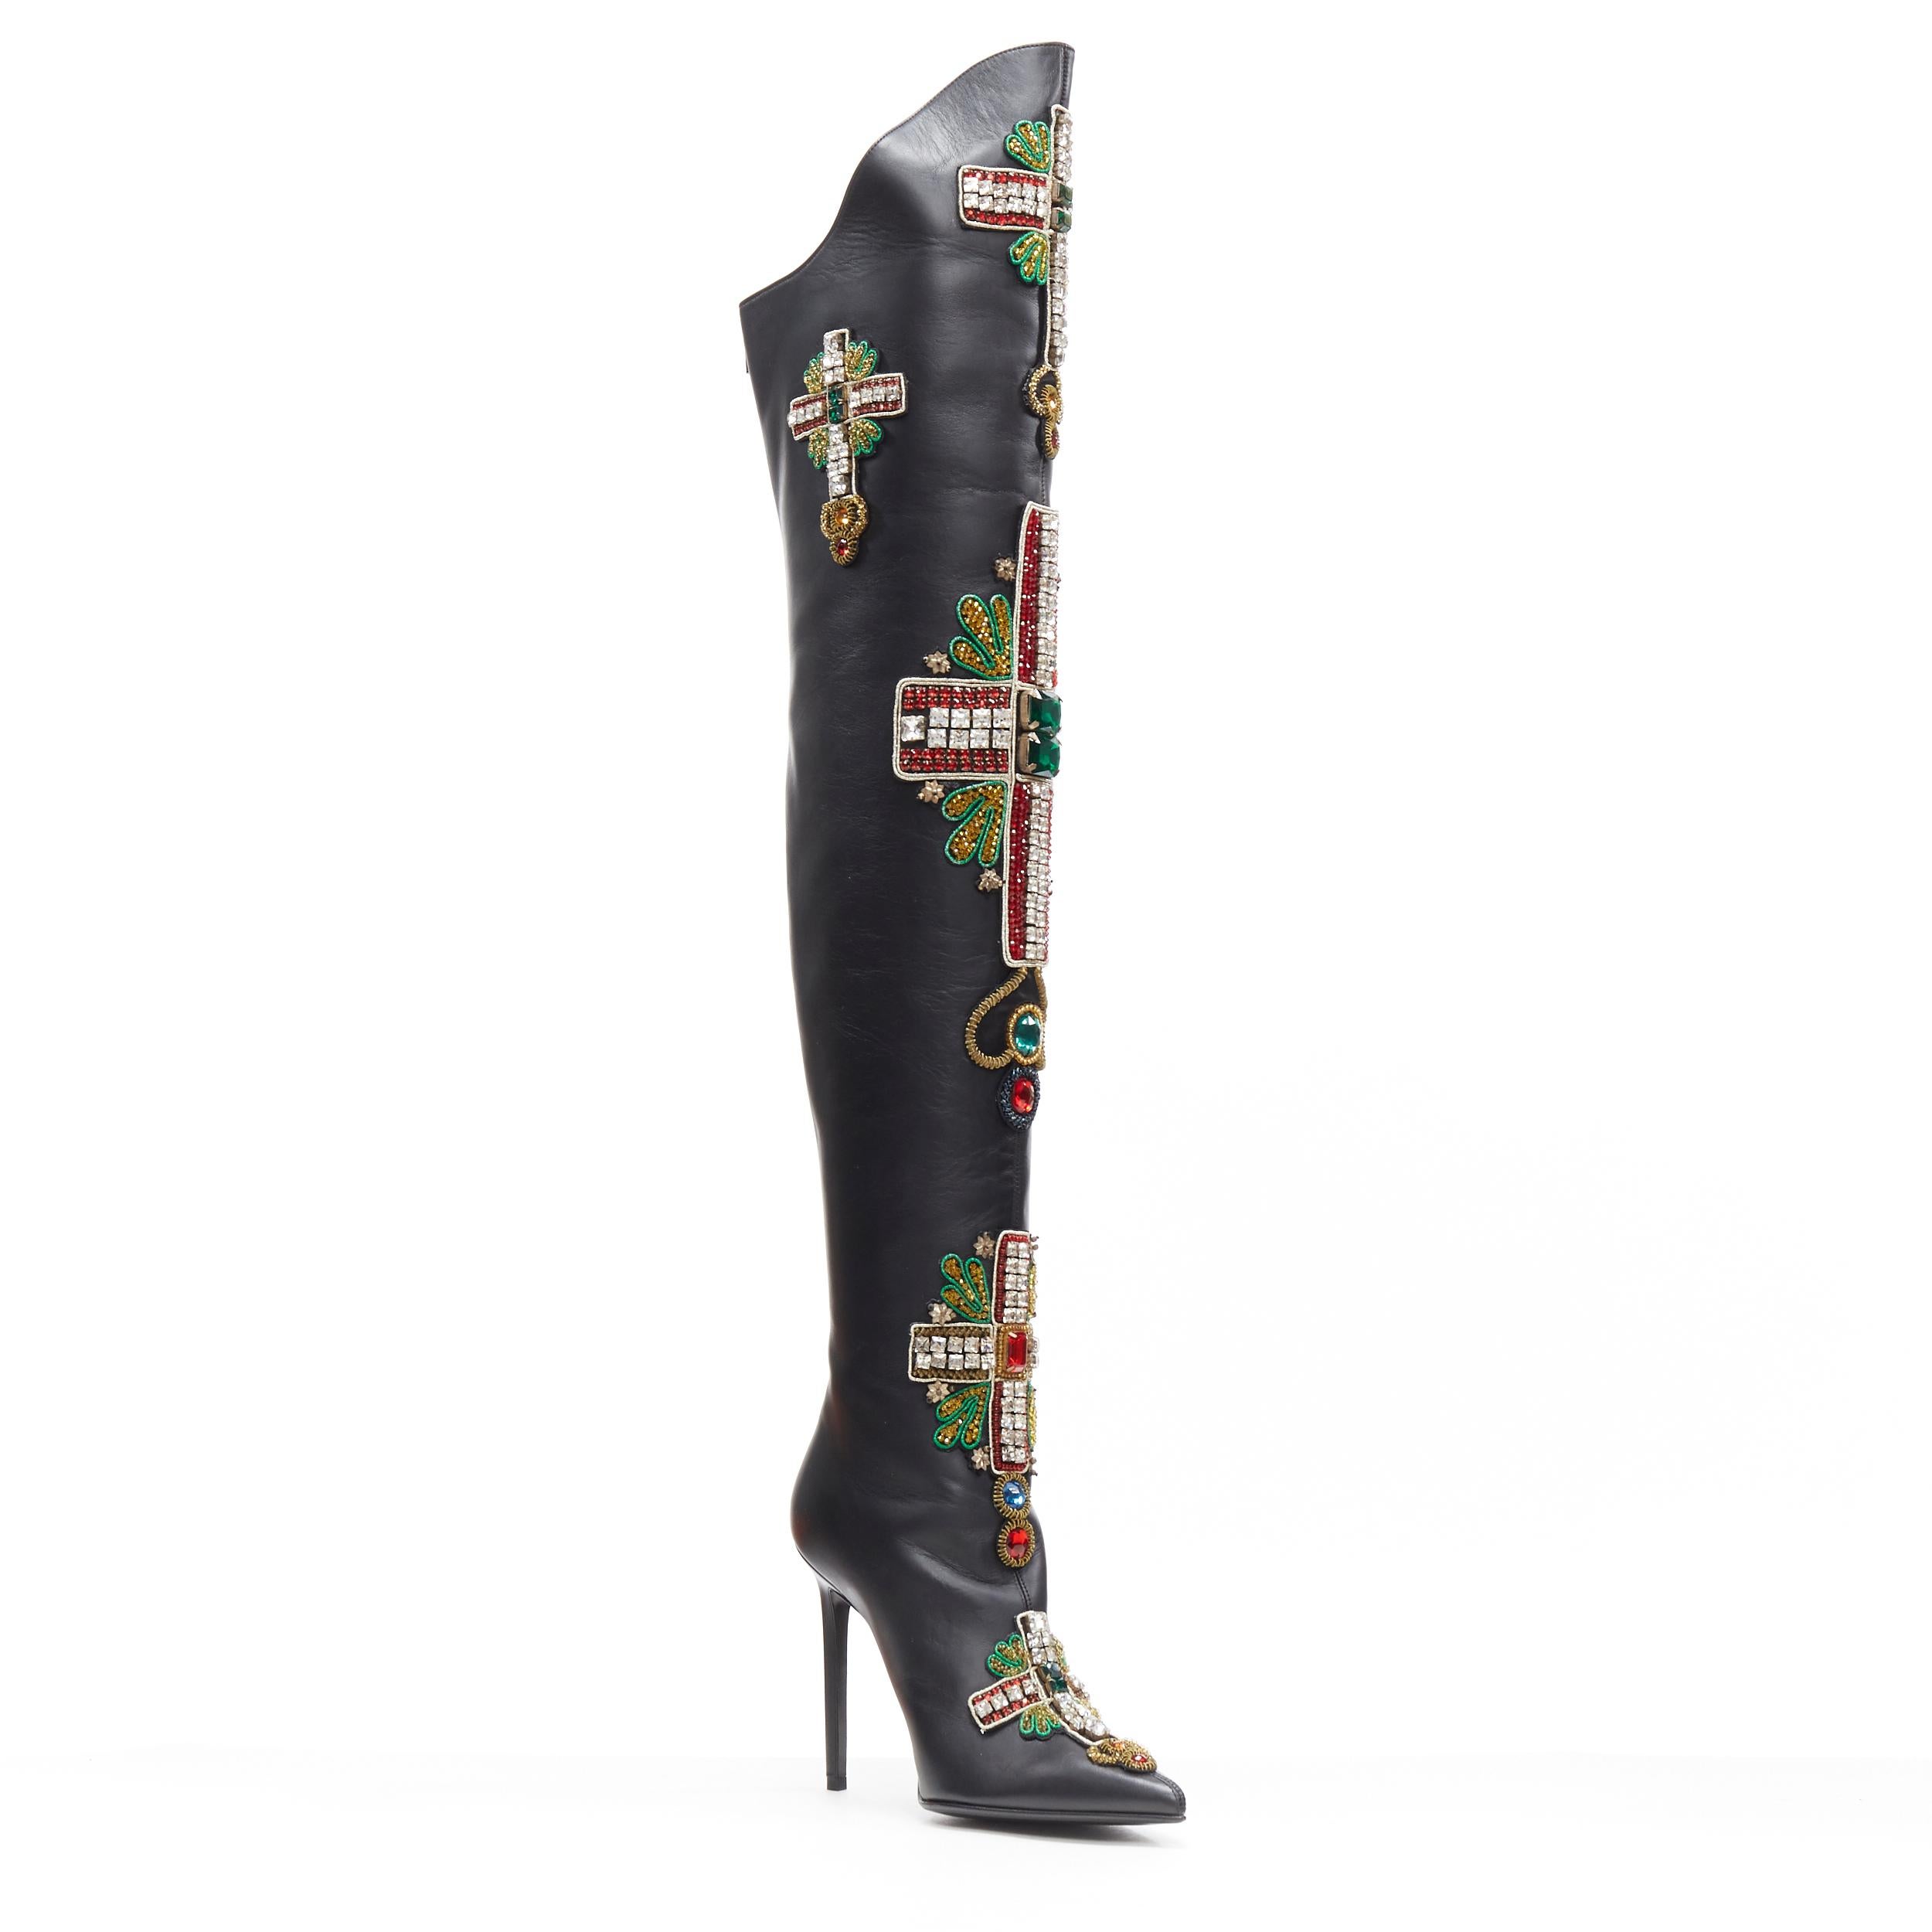 new VERSACE SS18 Runway Byzantine Cross strass jewel embellished knee boot EU38
Brand: Versace
Designer: Donatella Versace
Collection: Spring Summer 2018
Model Name / Style: Byzantine boots
Material: Leather; calf 
Color: Black
Pattern: Abstract;